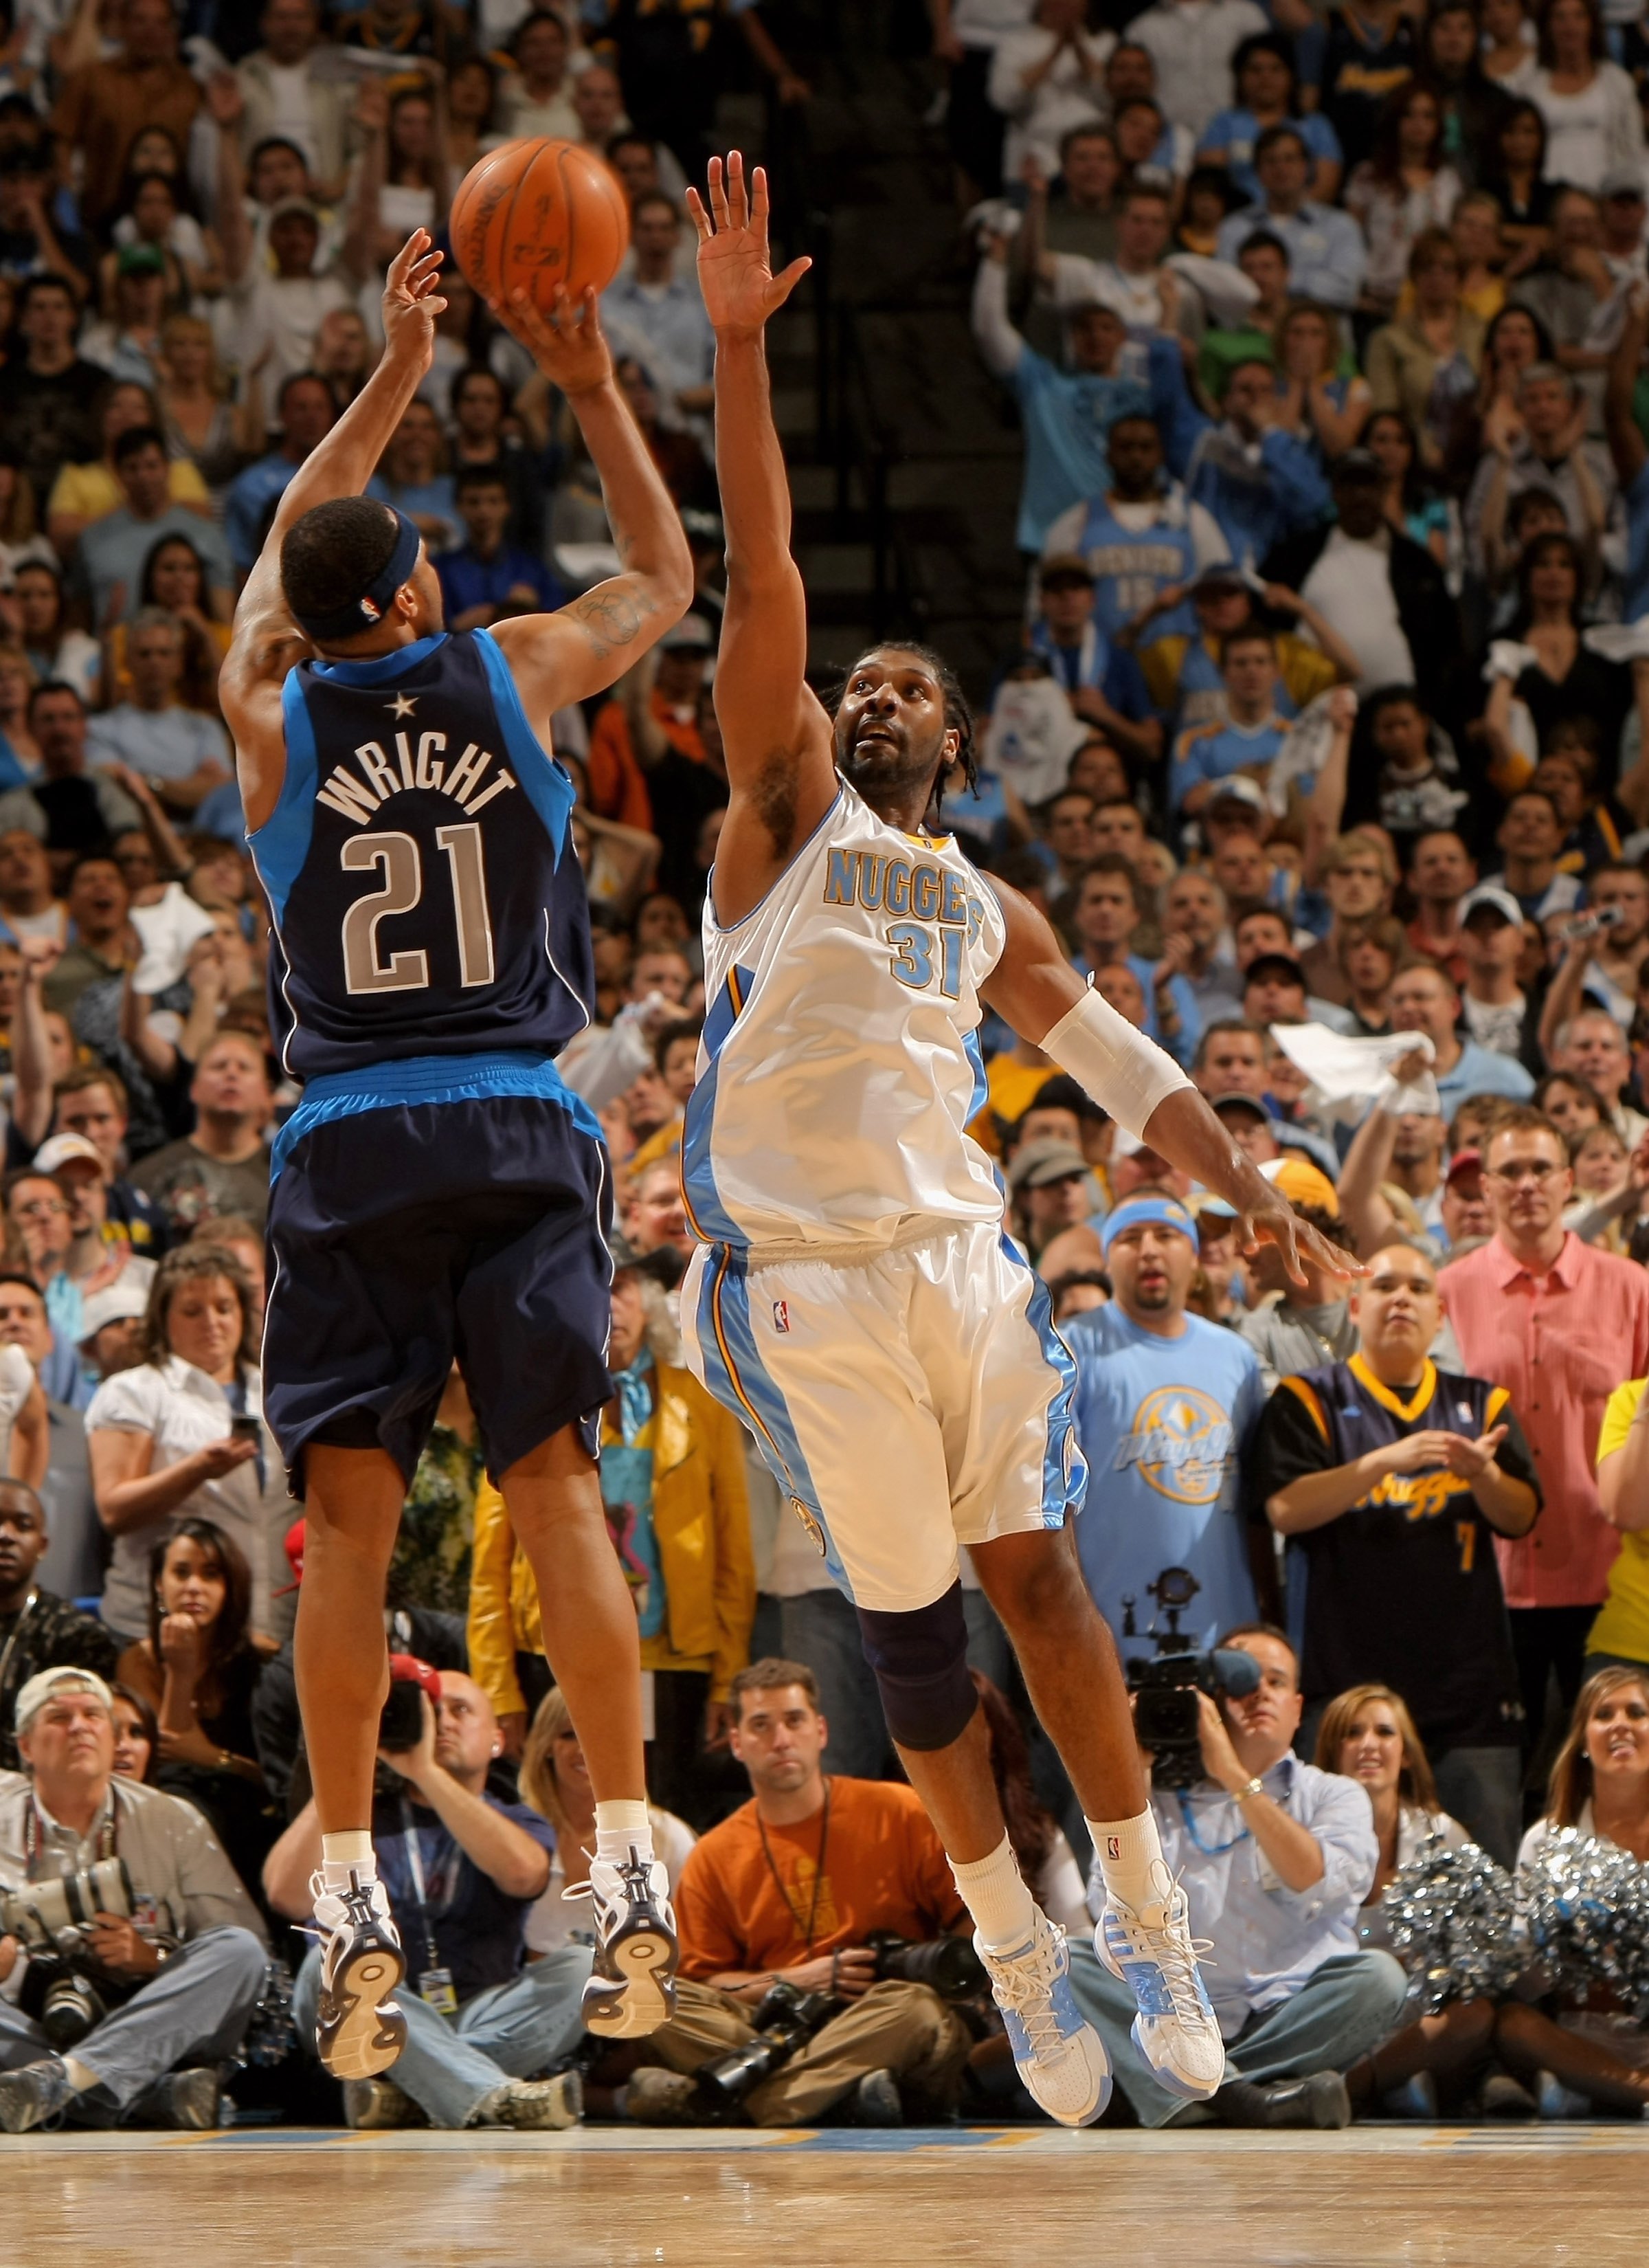 DENVER - MAY 13:  Nene #31 of the Denver Nuggets defends against a shot by Antoine Wright #21 of the Dallas Mavericks in Game Five of the Western Conference Semifinals during the 2009 NBA Playoffs at Pepsi Center on May 13, 2009 in Denver, Colorado.  The